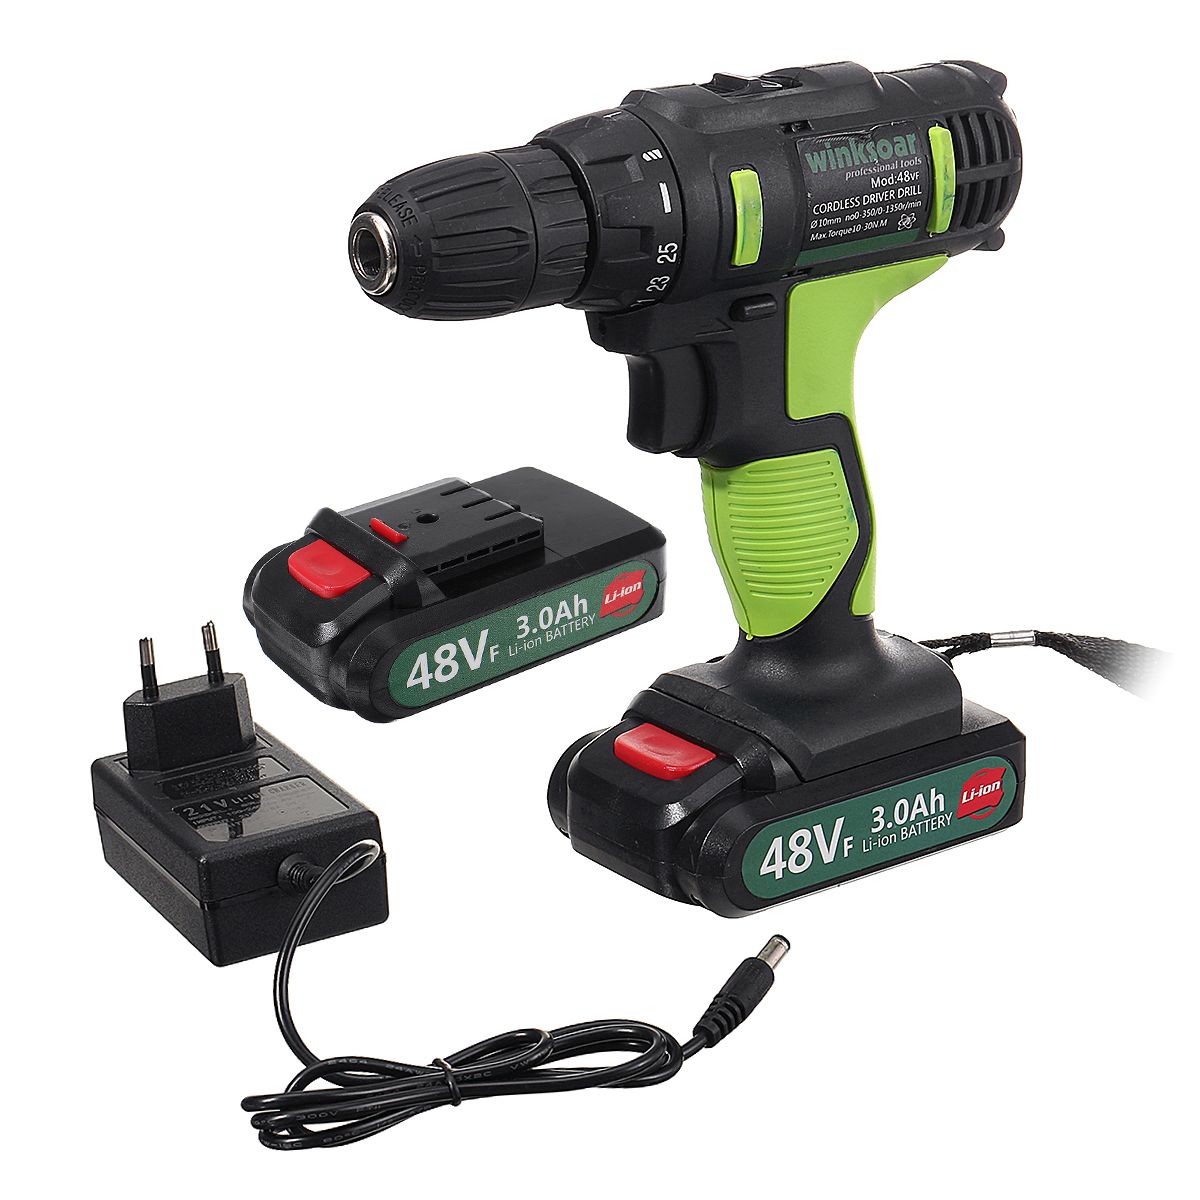 48VF-Cordless-Impact-Lithium-Electric-Drill-2-Speed-Electric-Hand-Drill-LED-lighting-12Pcs-Large-Cap-1555381